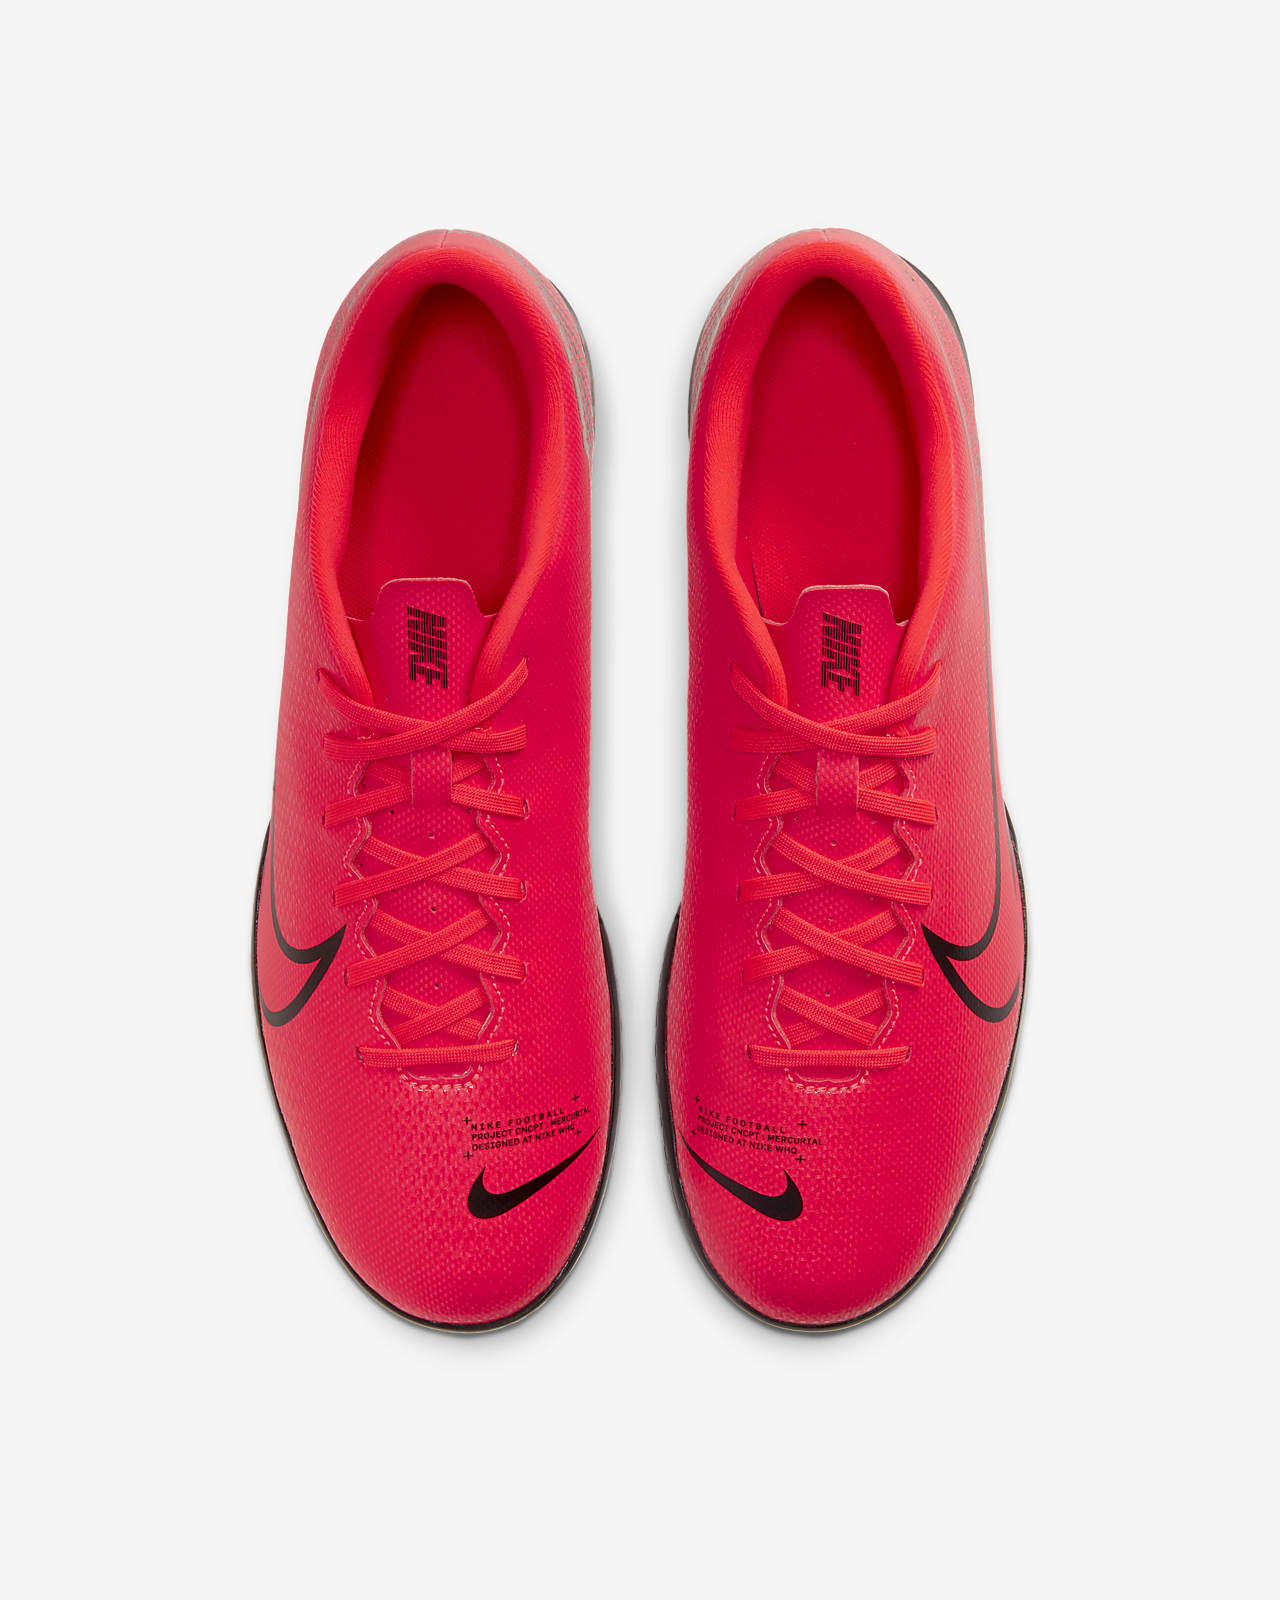 nike football project cncpt mercurial